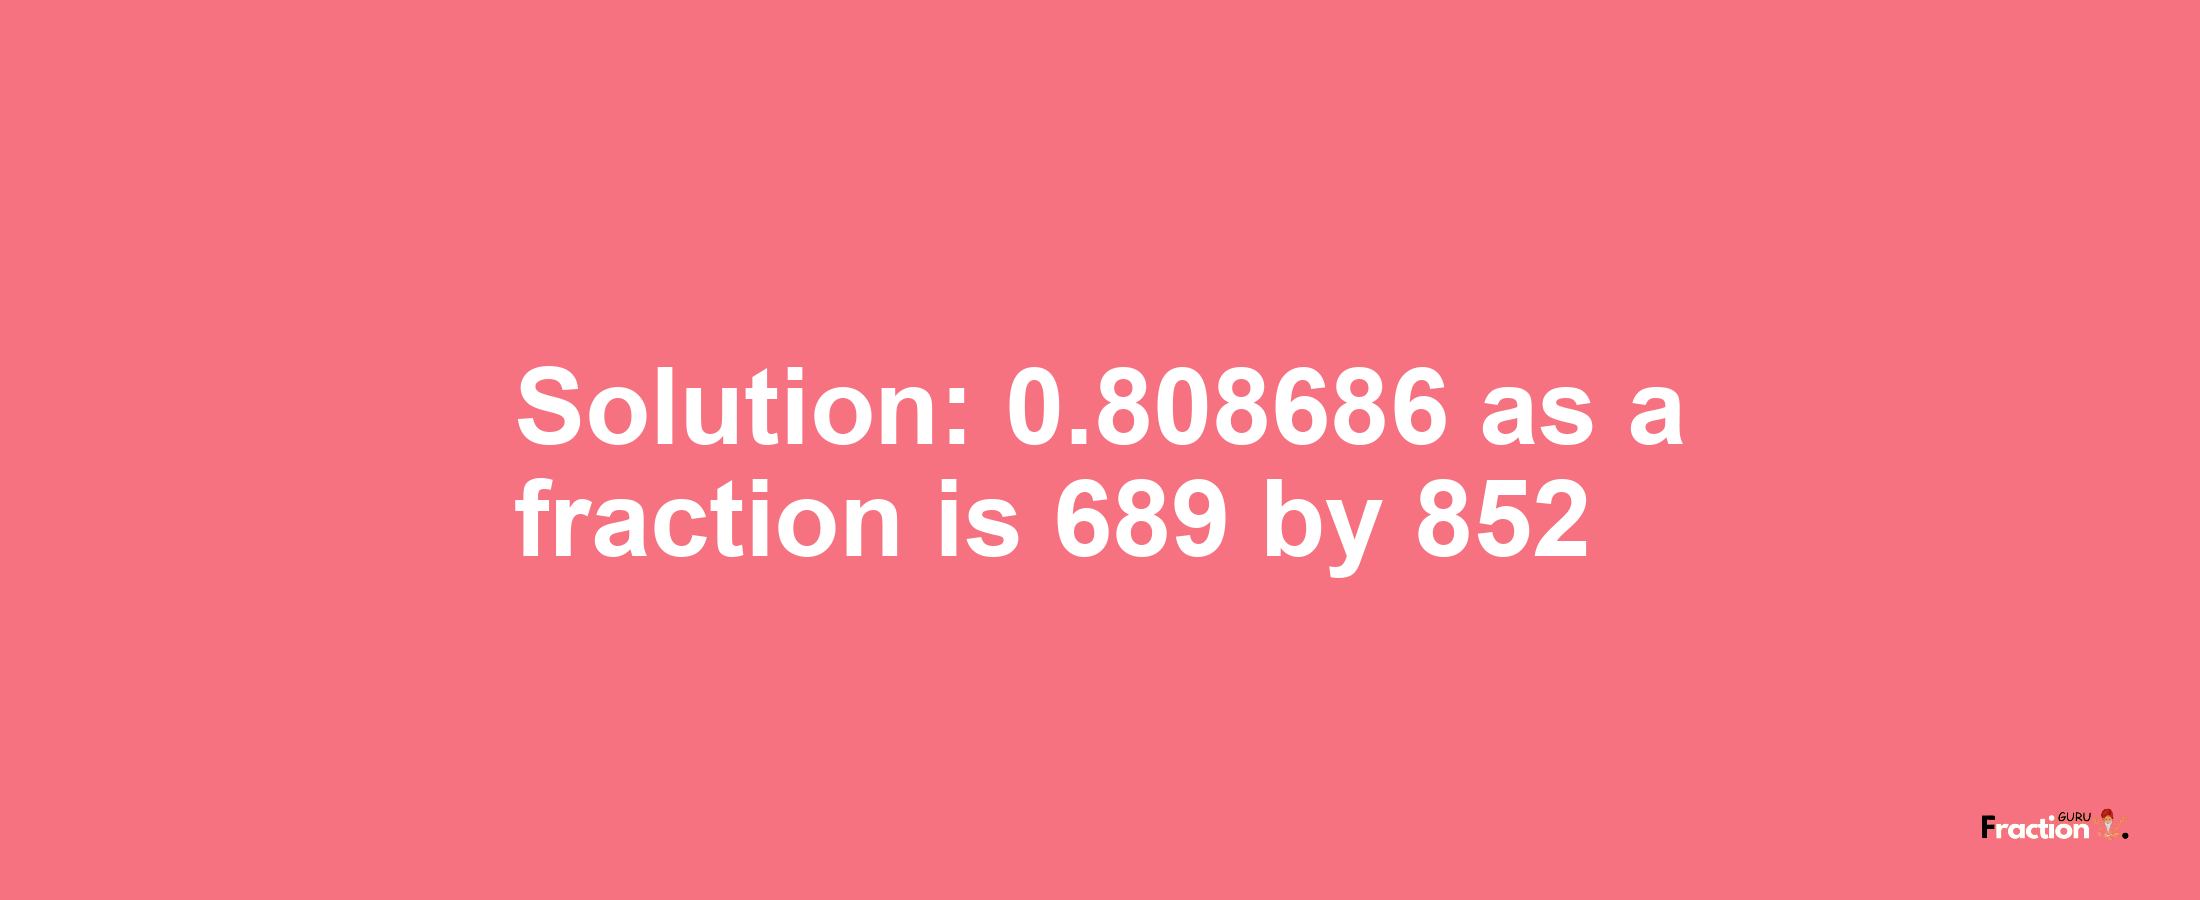 Solution:0.808686 as a fraction is 689/852